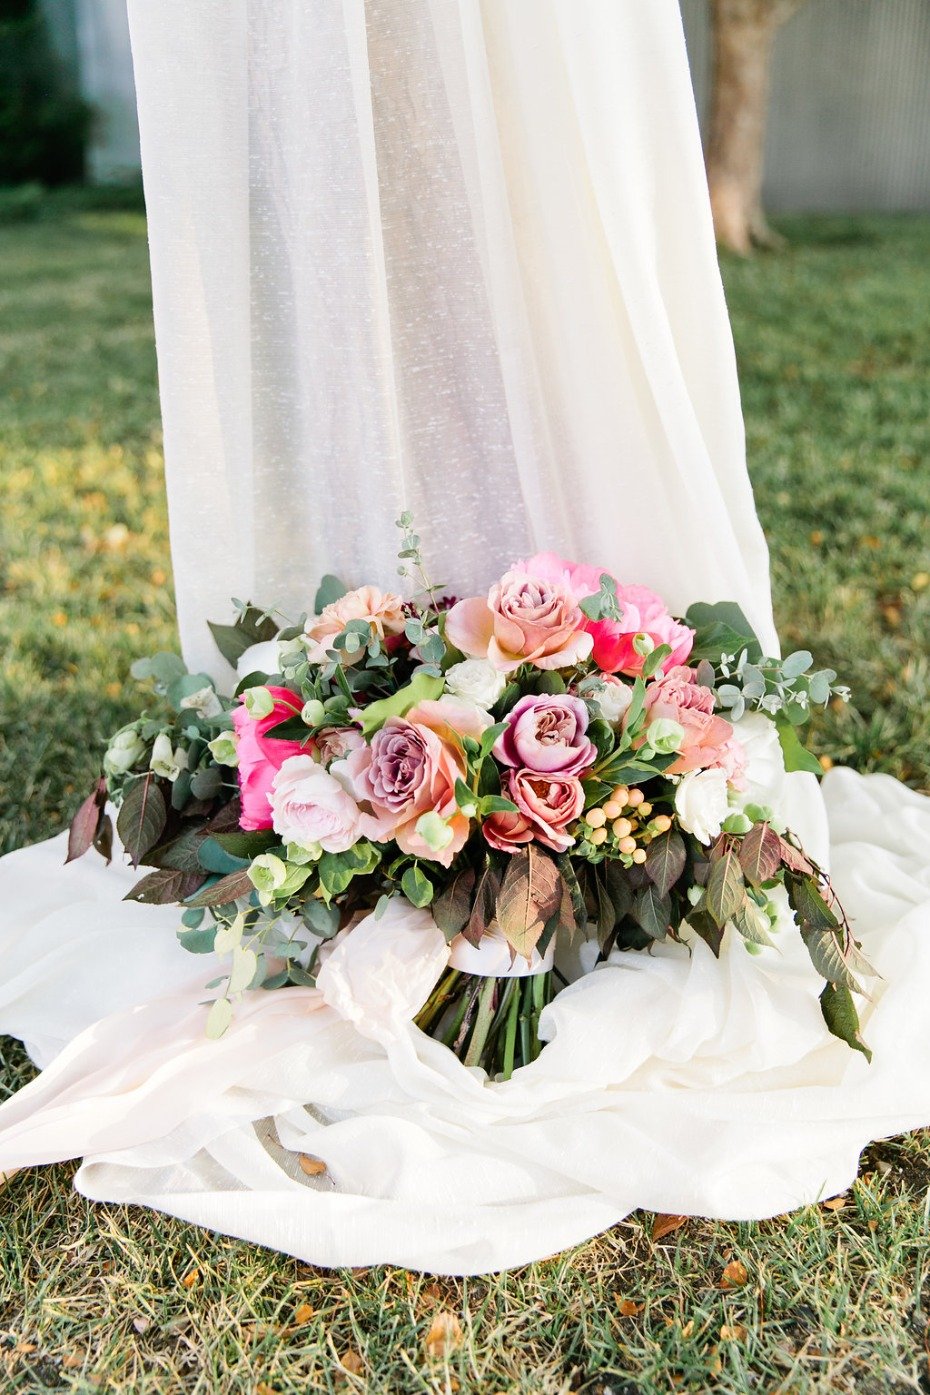 5 ways a Great Florist Can Rock Your Wedding Day